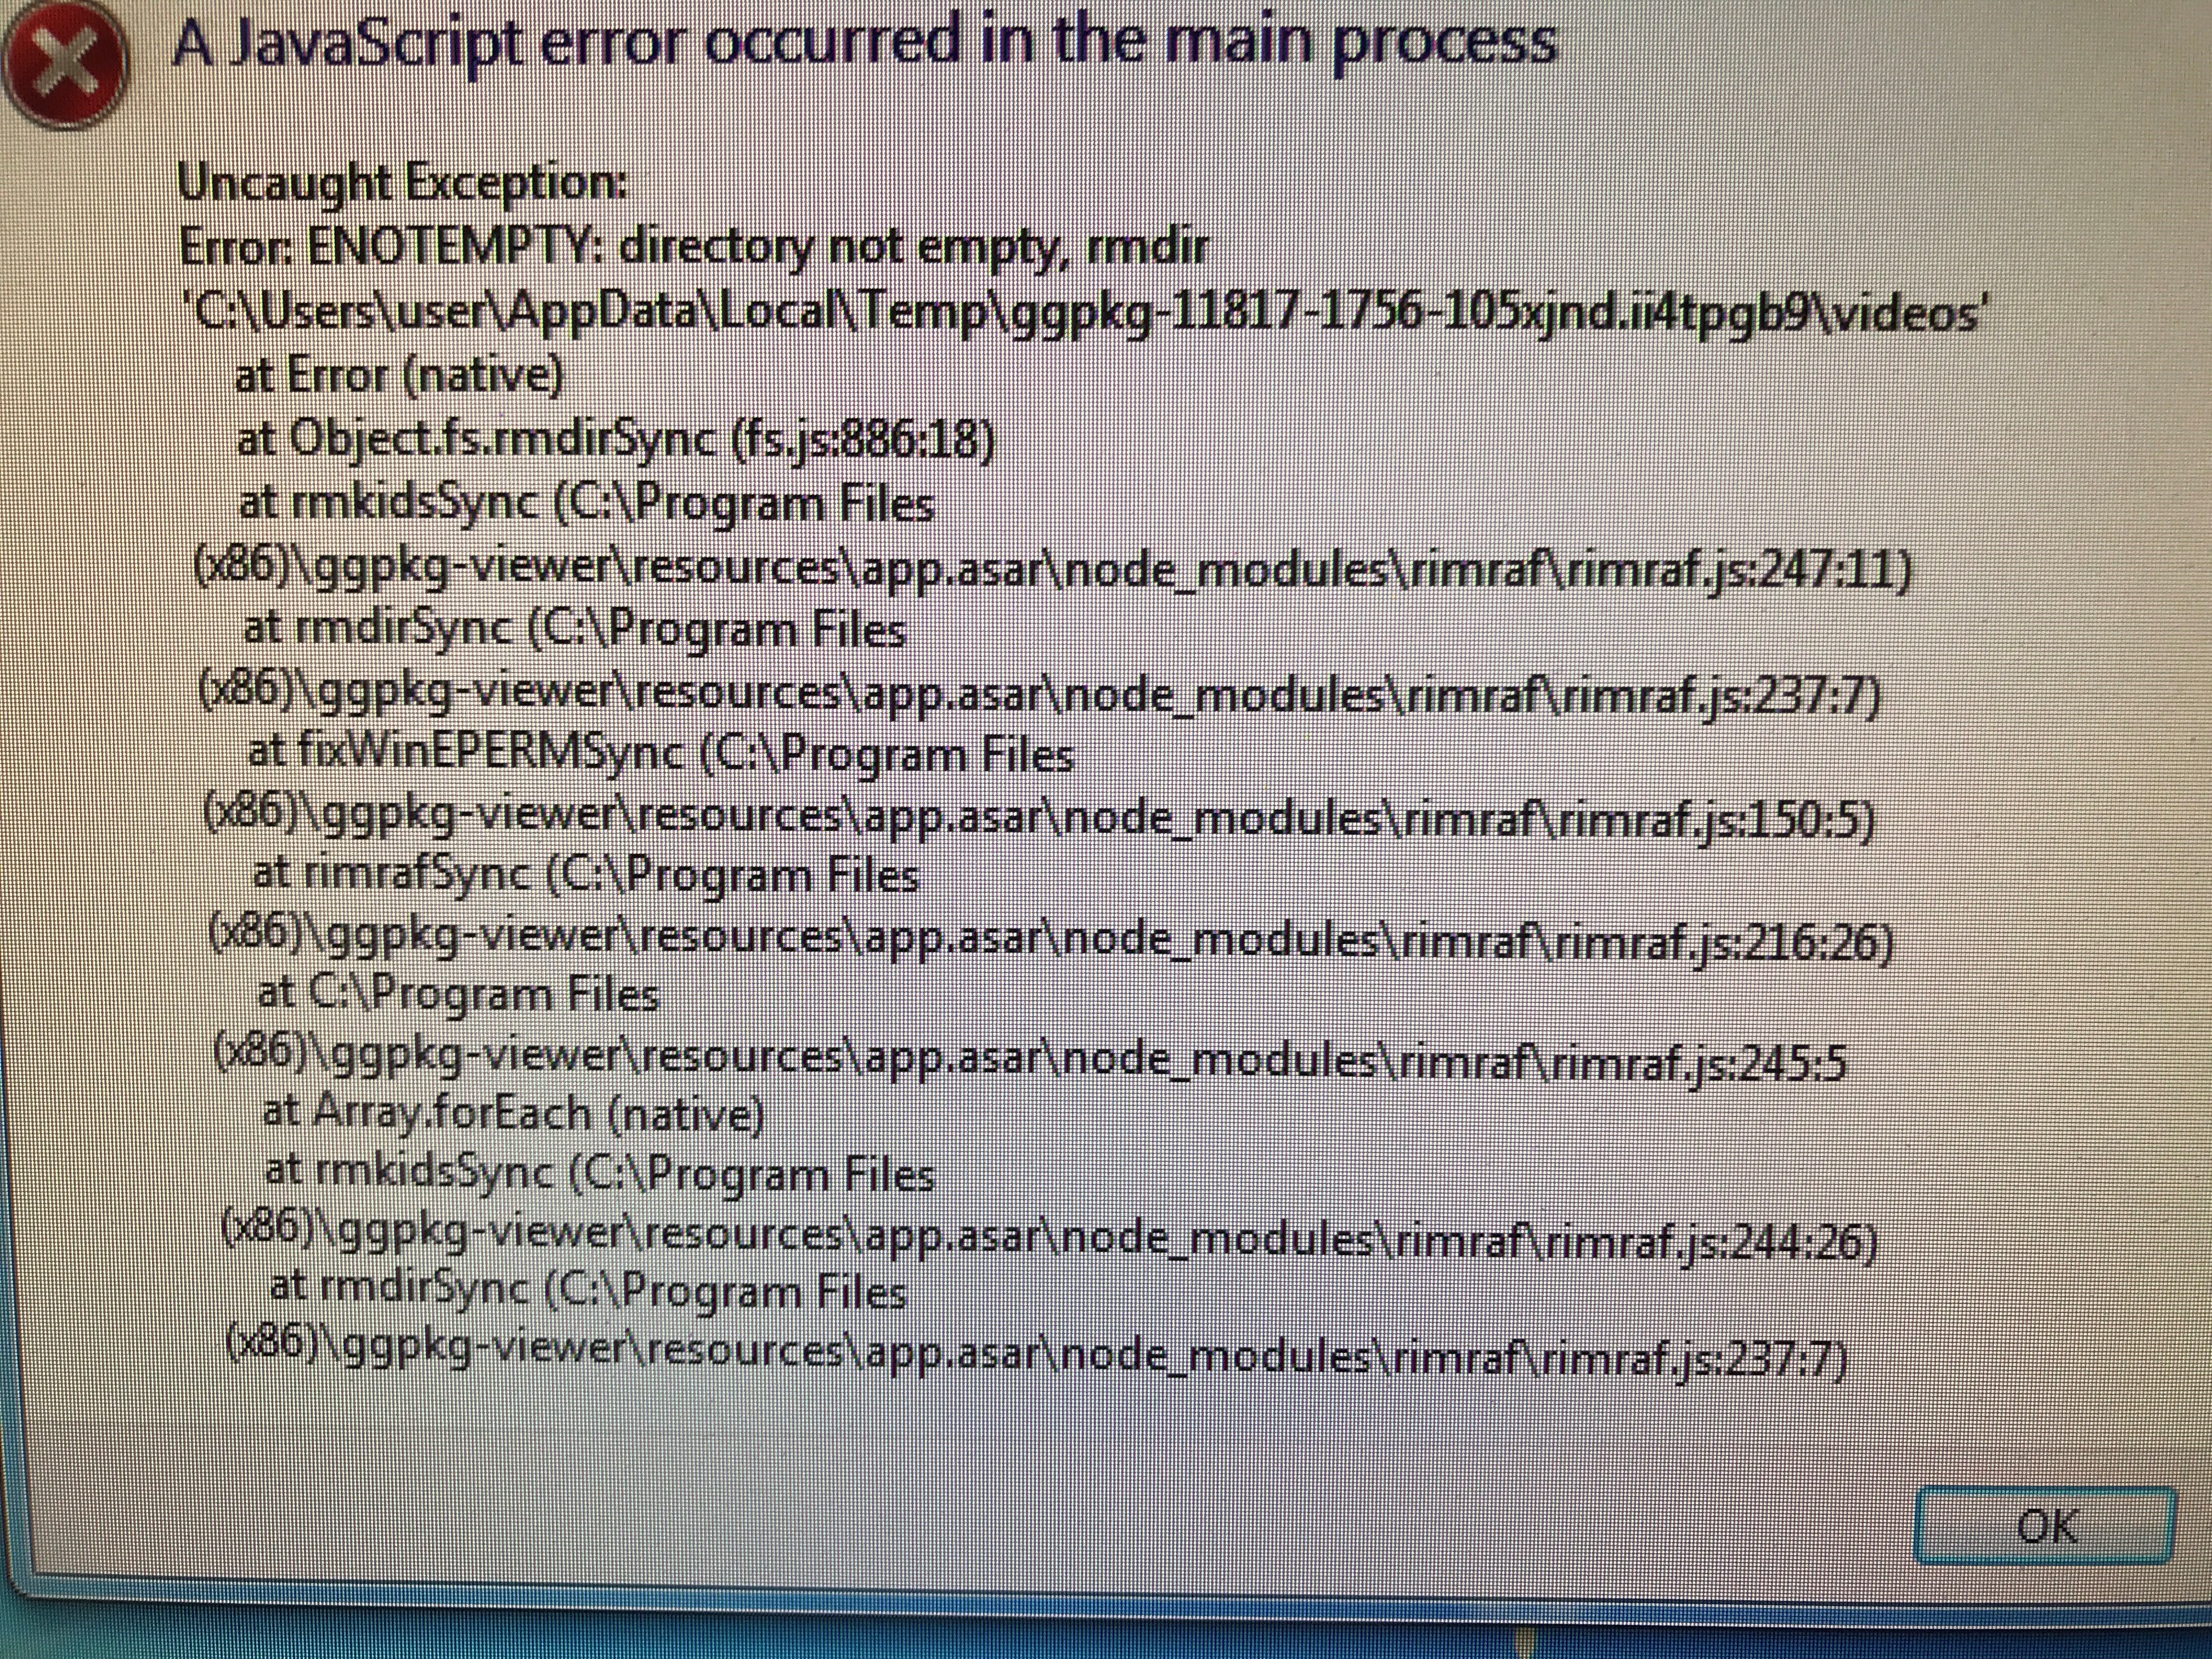 java script errors produced after using a Package Viewer.